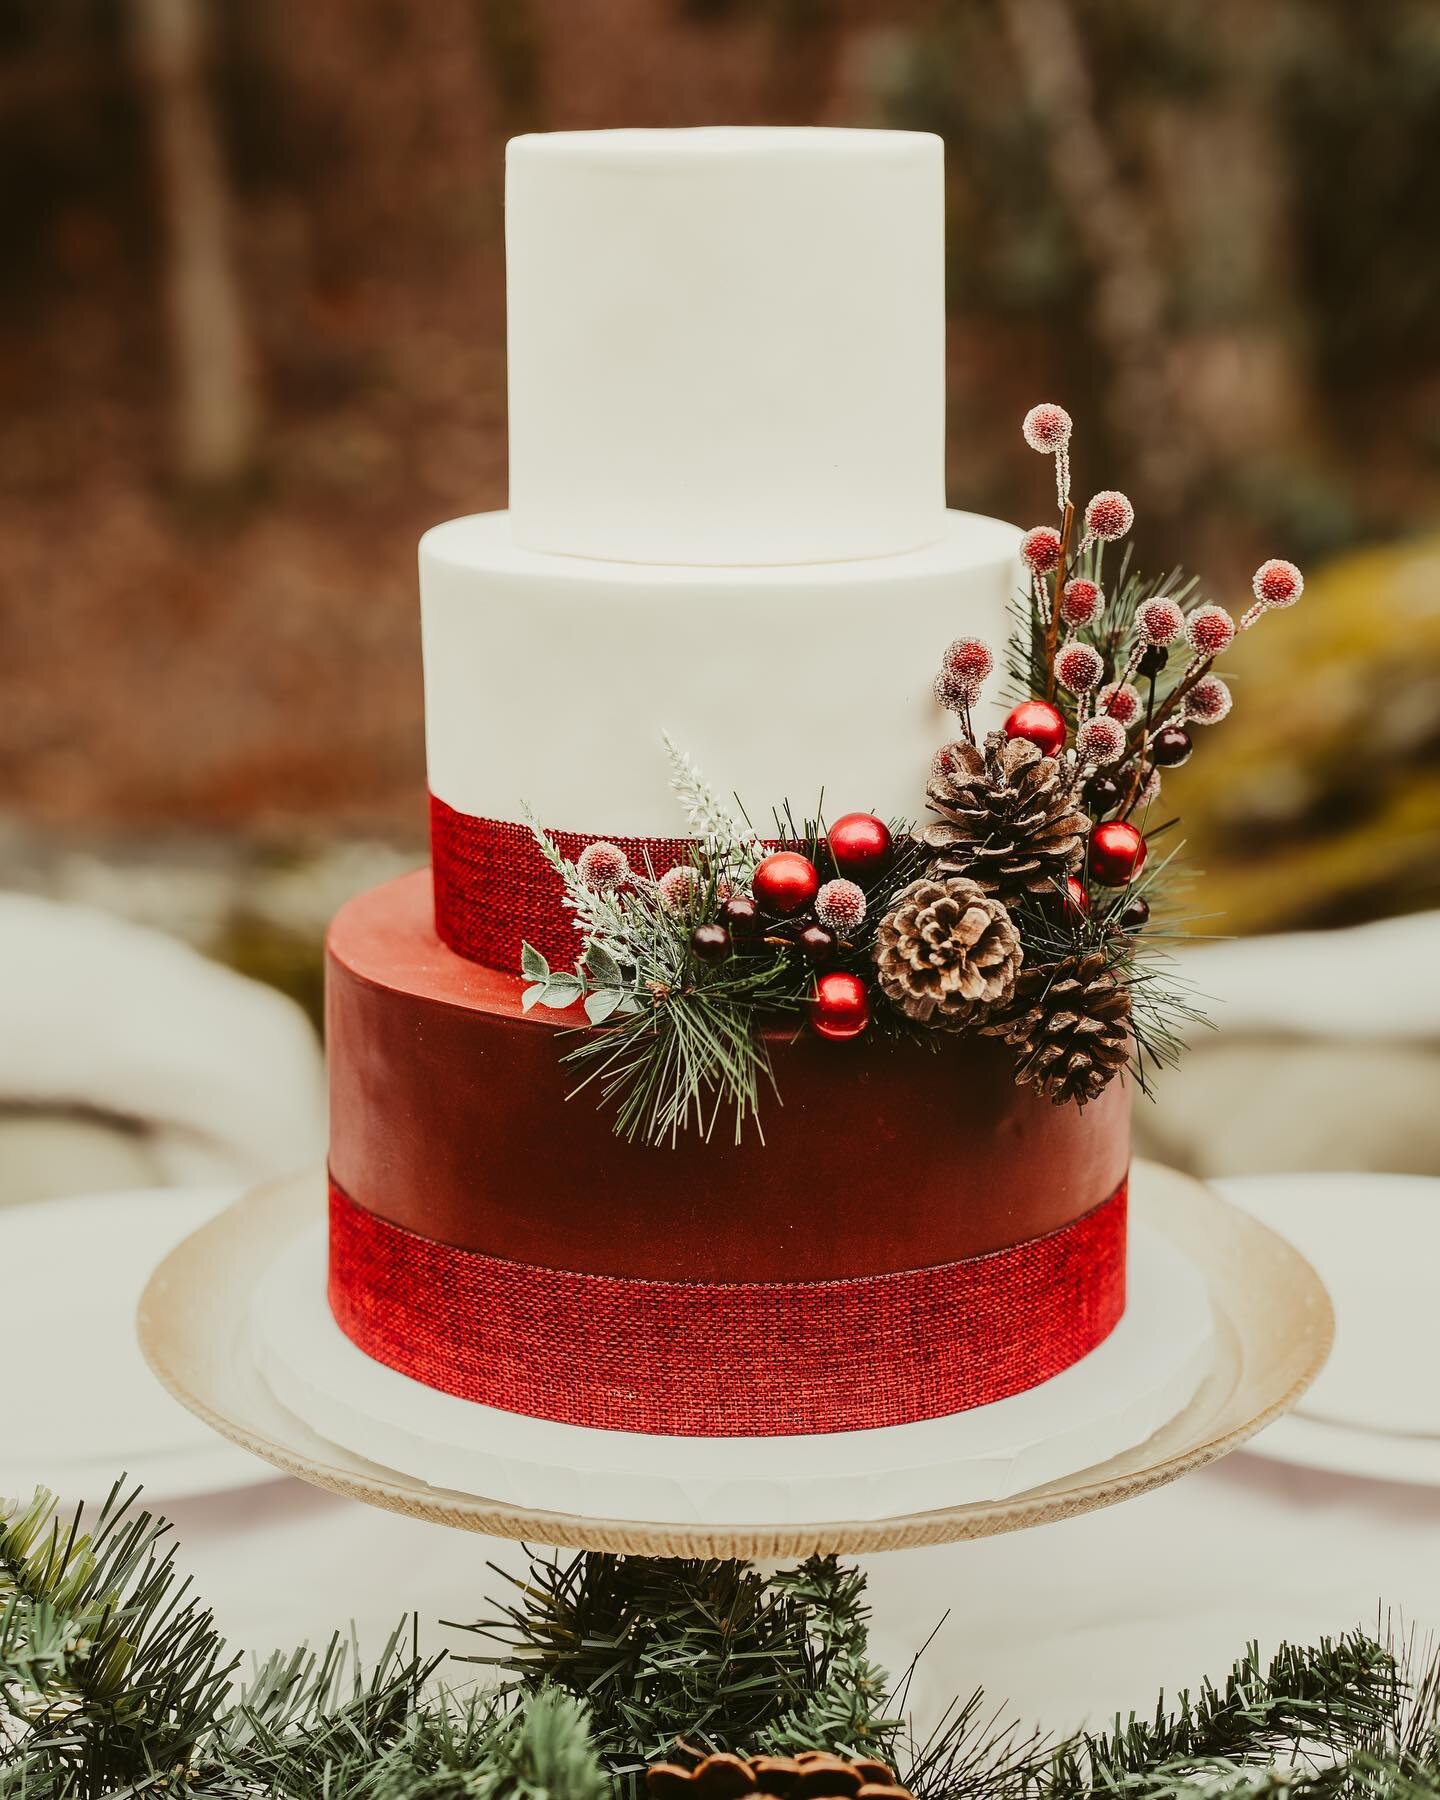 Happy Holiday's!!!!

A little Christmas inspiration for all of our lovely couples!  It's one of our favorite times of the year and wanted to share a sneak peek from a recent photo shoot.

📷: @sjcproductionsandmedia 

Hosted by: @darcyclaiire and @mo